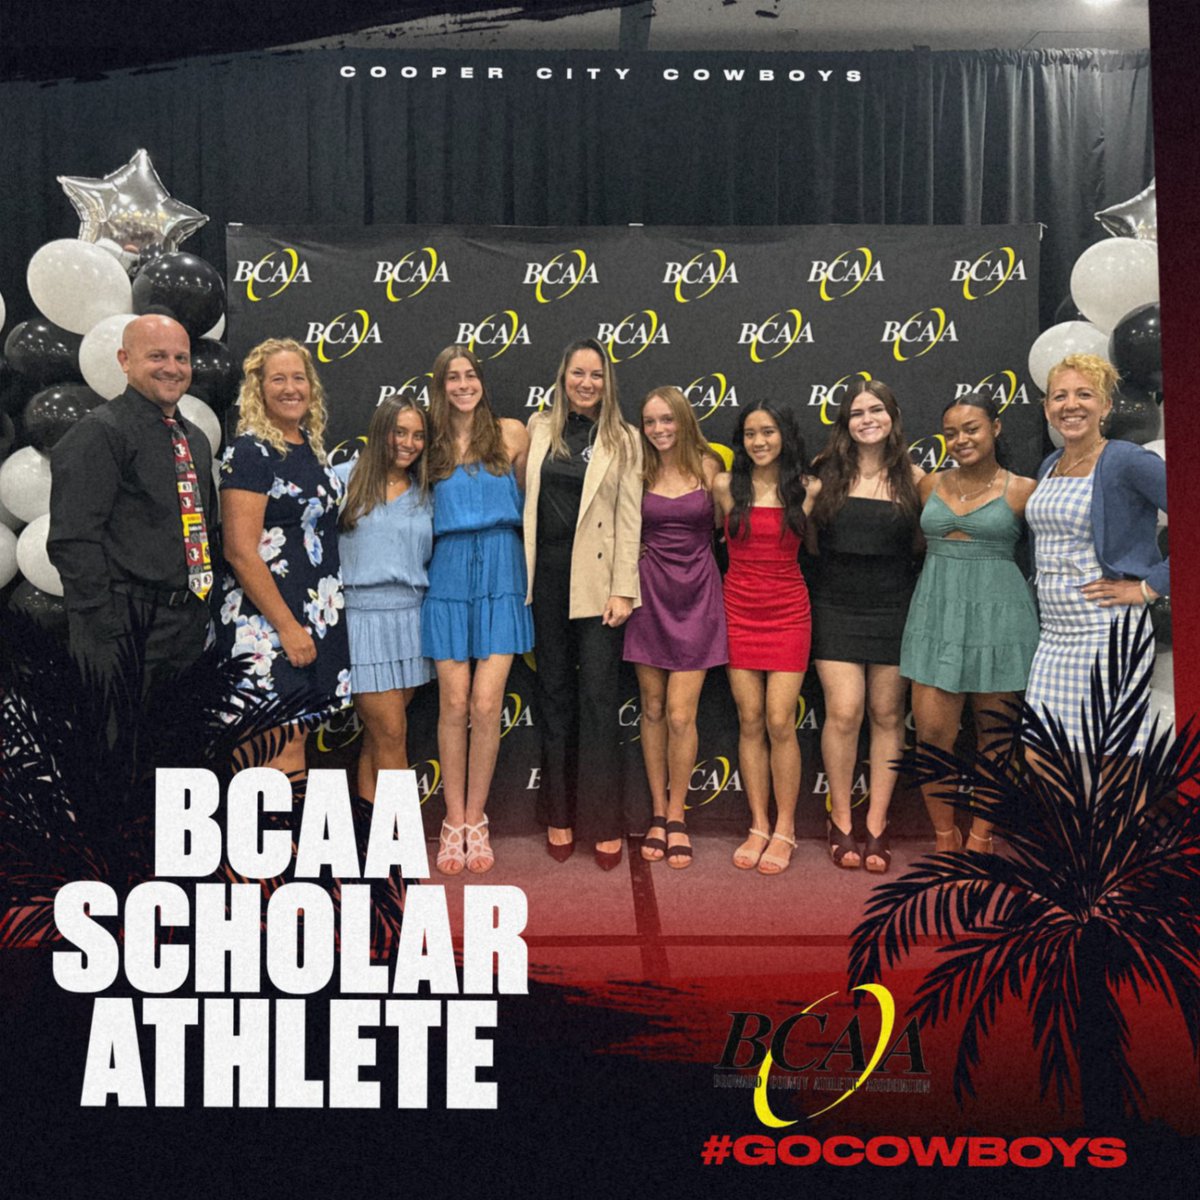 Congratulations to the Cowboys' Scholar Athletes honored last night at the BCAA Scholar Athlete Banquet. CCHS had two scholarship award winners, The Superintendent Scholarship Award and the BSN Sports Scholarship Award. Go Cowboys! @Principal_CCHS @CooperCityHigh